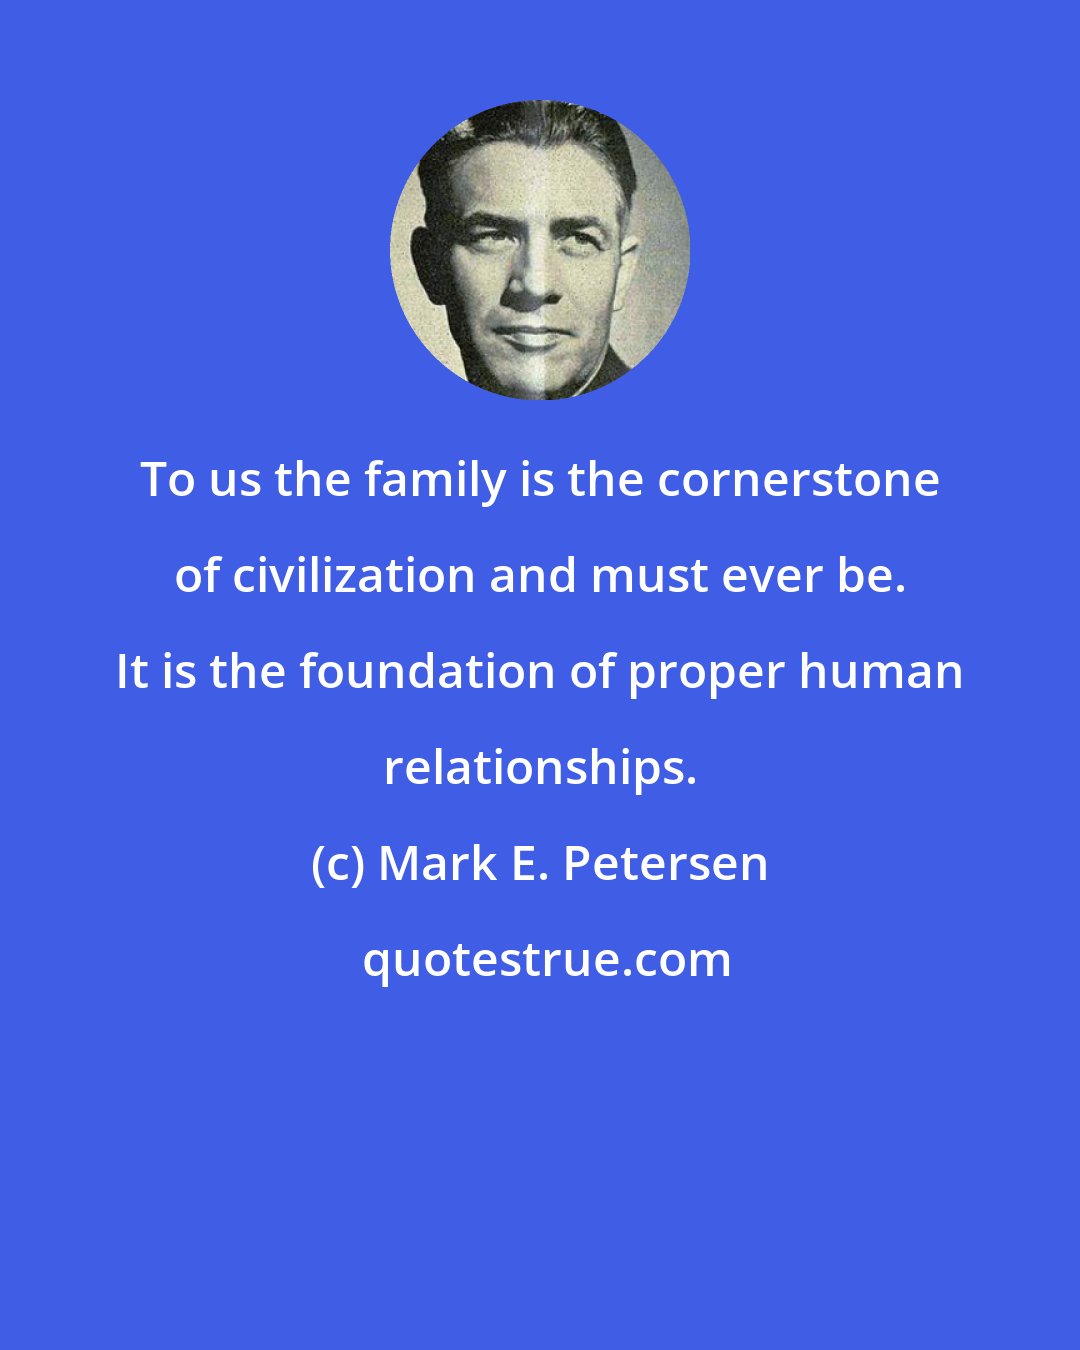 Mark E. Petersen: To us the family is the cornerstone of civilization and must ever be. It is the foundation of proper human relationships.